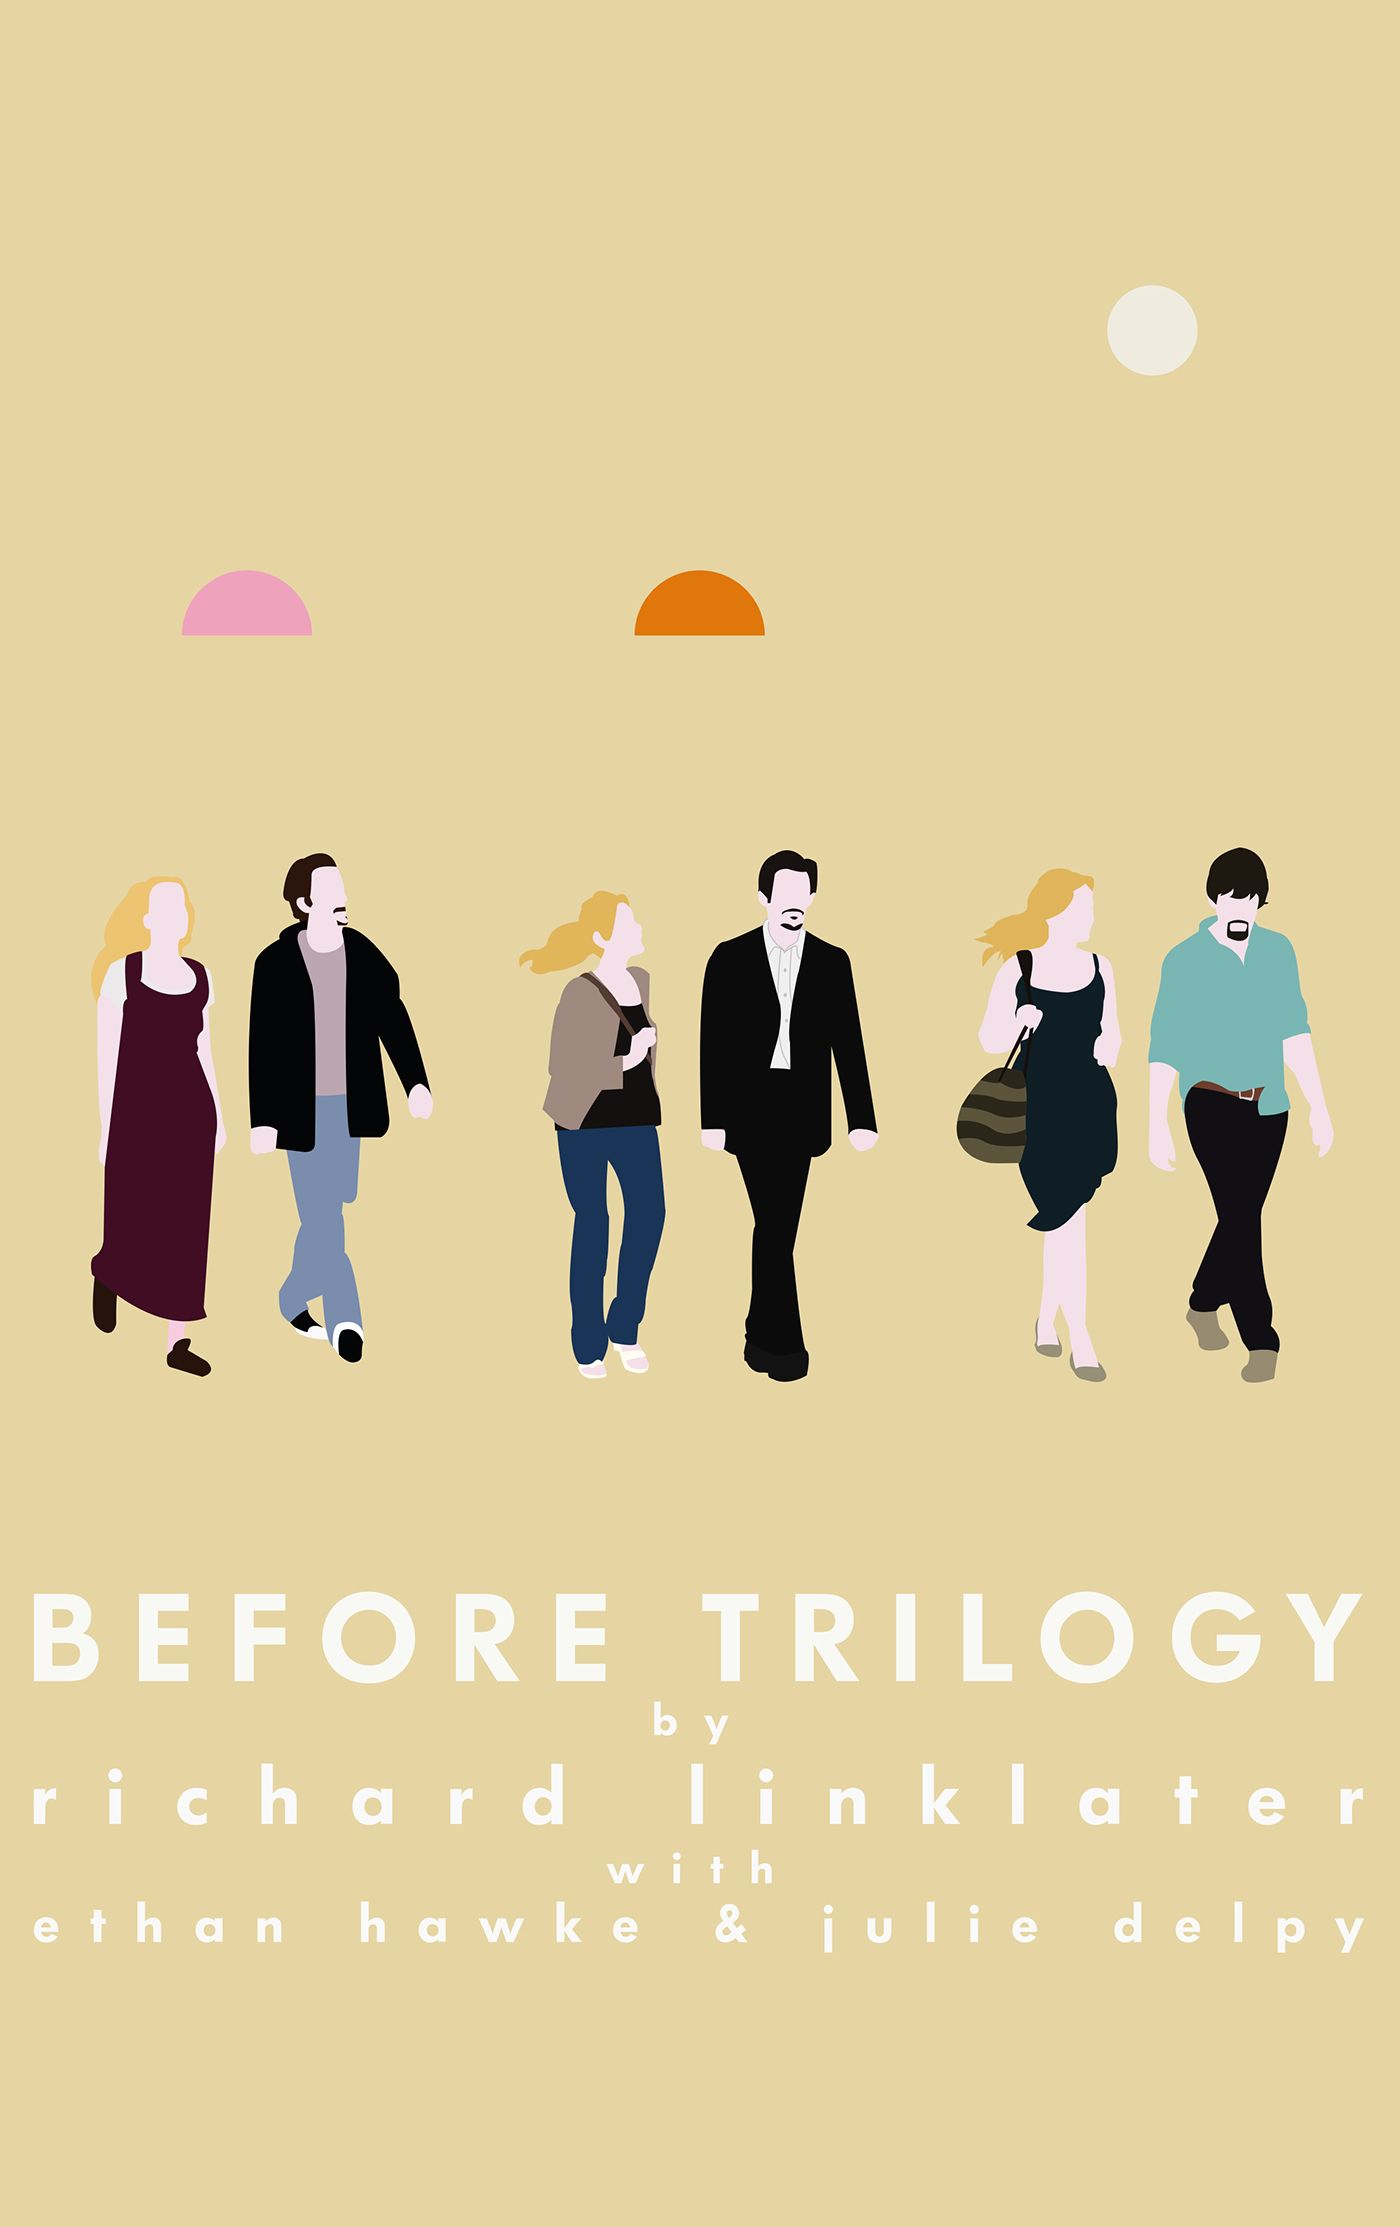 Another version of poster to celebrate the trilogy of Richard Linklater. Before trilogy, Sunset movies, Before sunset movie